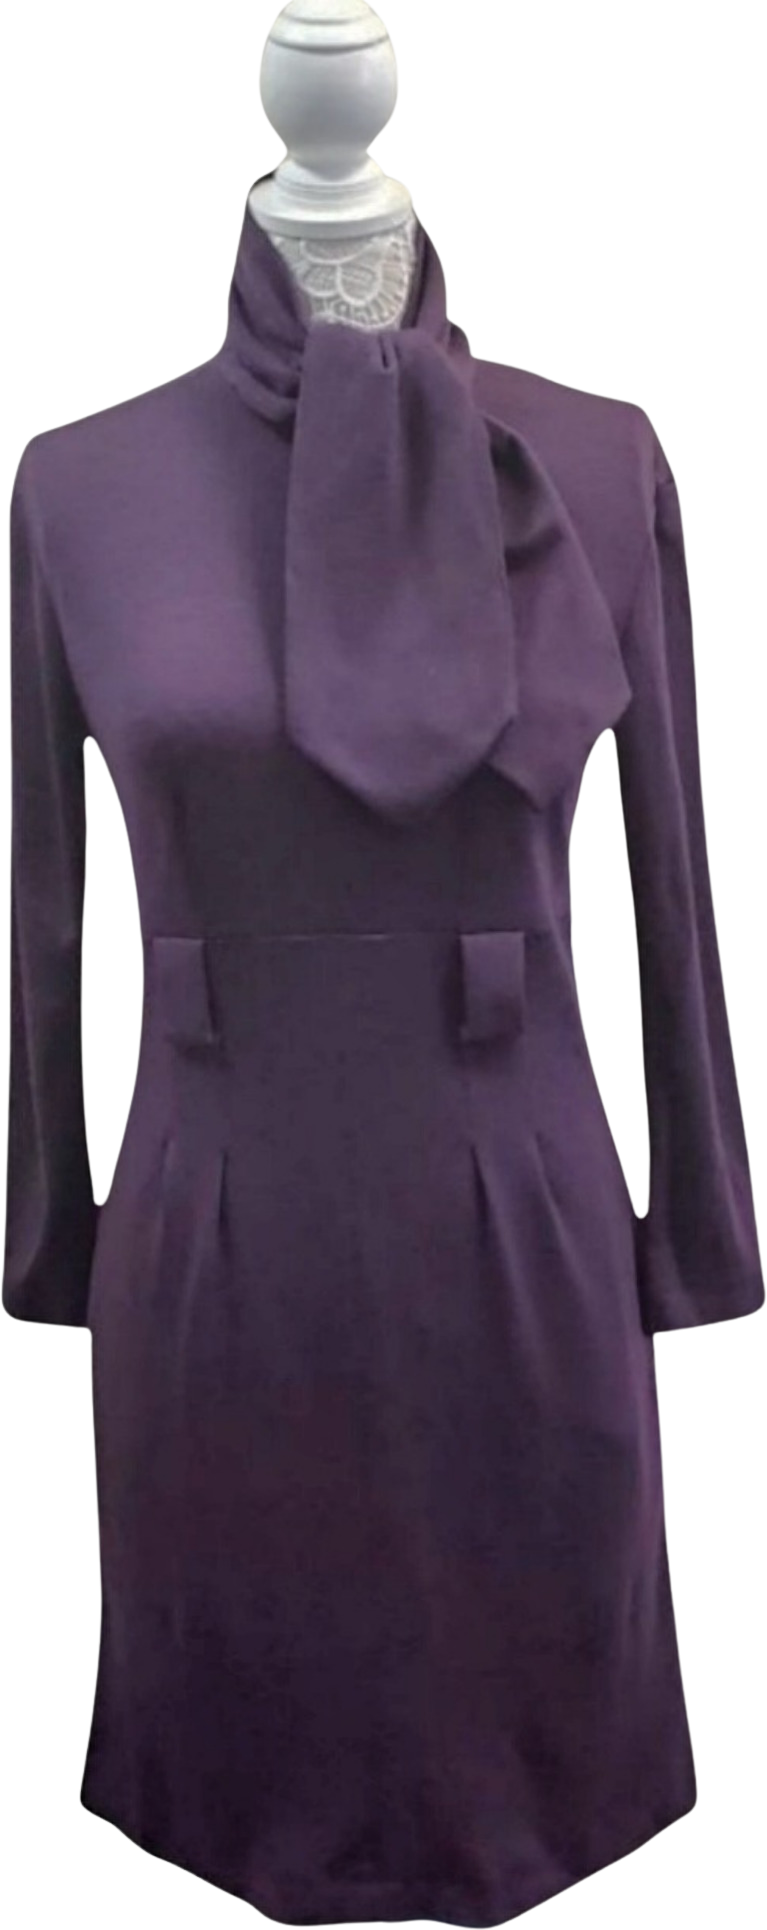 80s/90s Chanel Purple Wool Dress With Neck Tie Sz 8/42 By Chanel